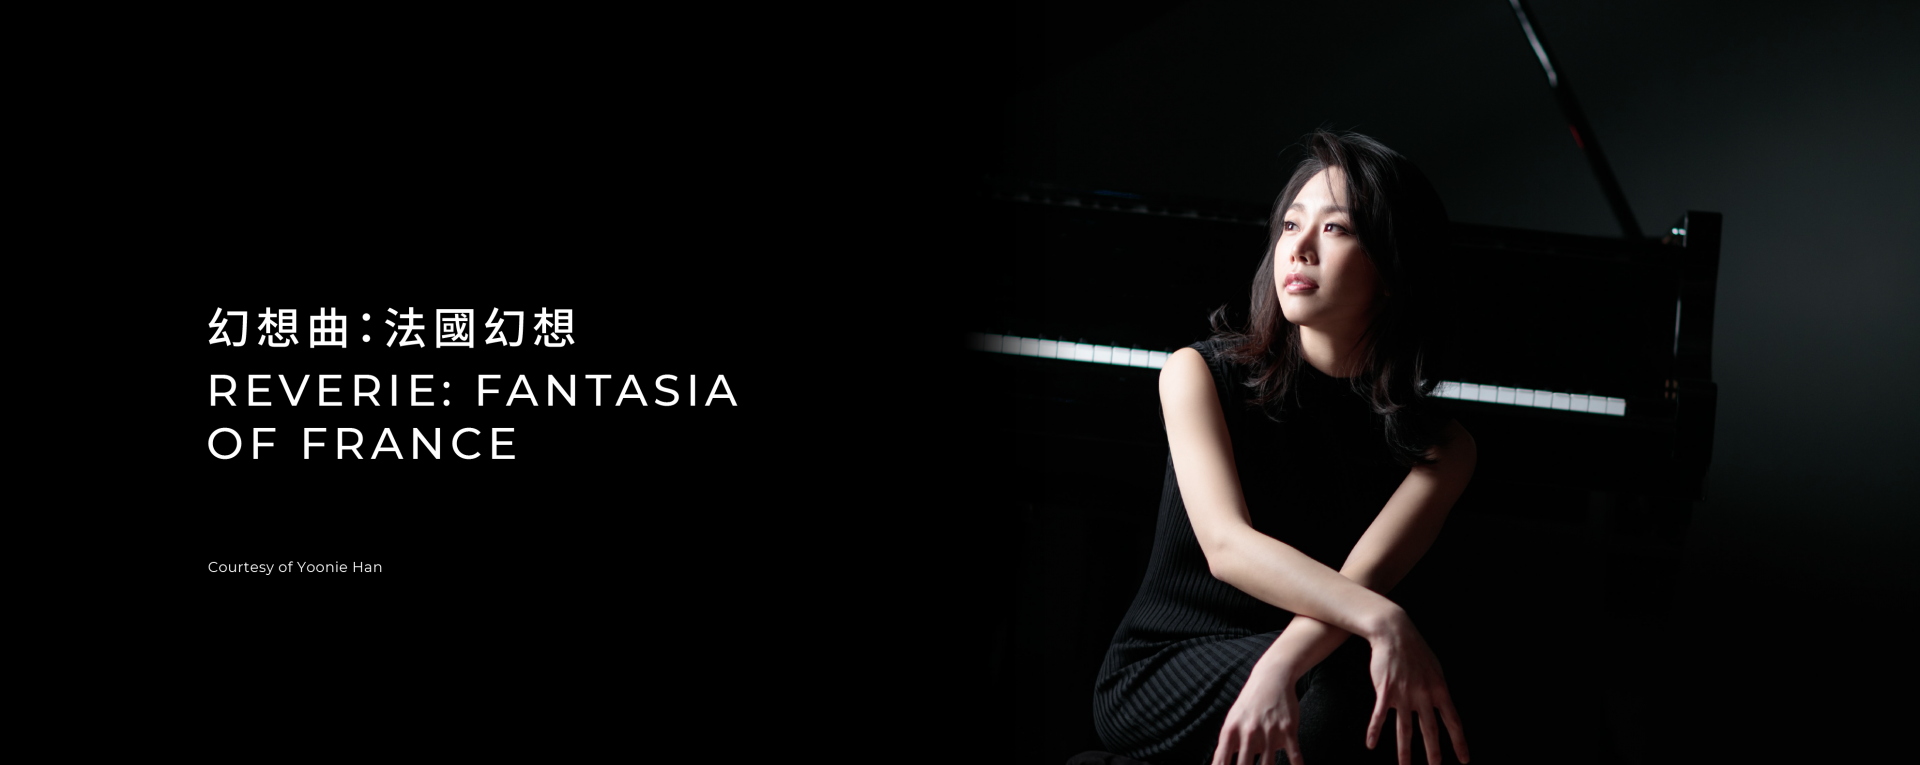 Reverie: Fantasia of France – HKBU Students Performing French Keyboard Repertoire on Piano